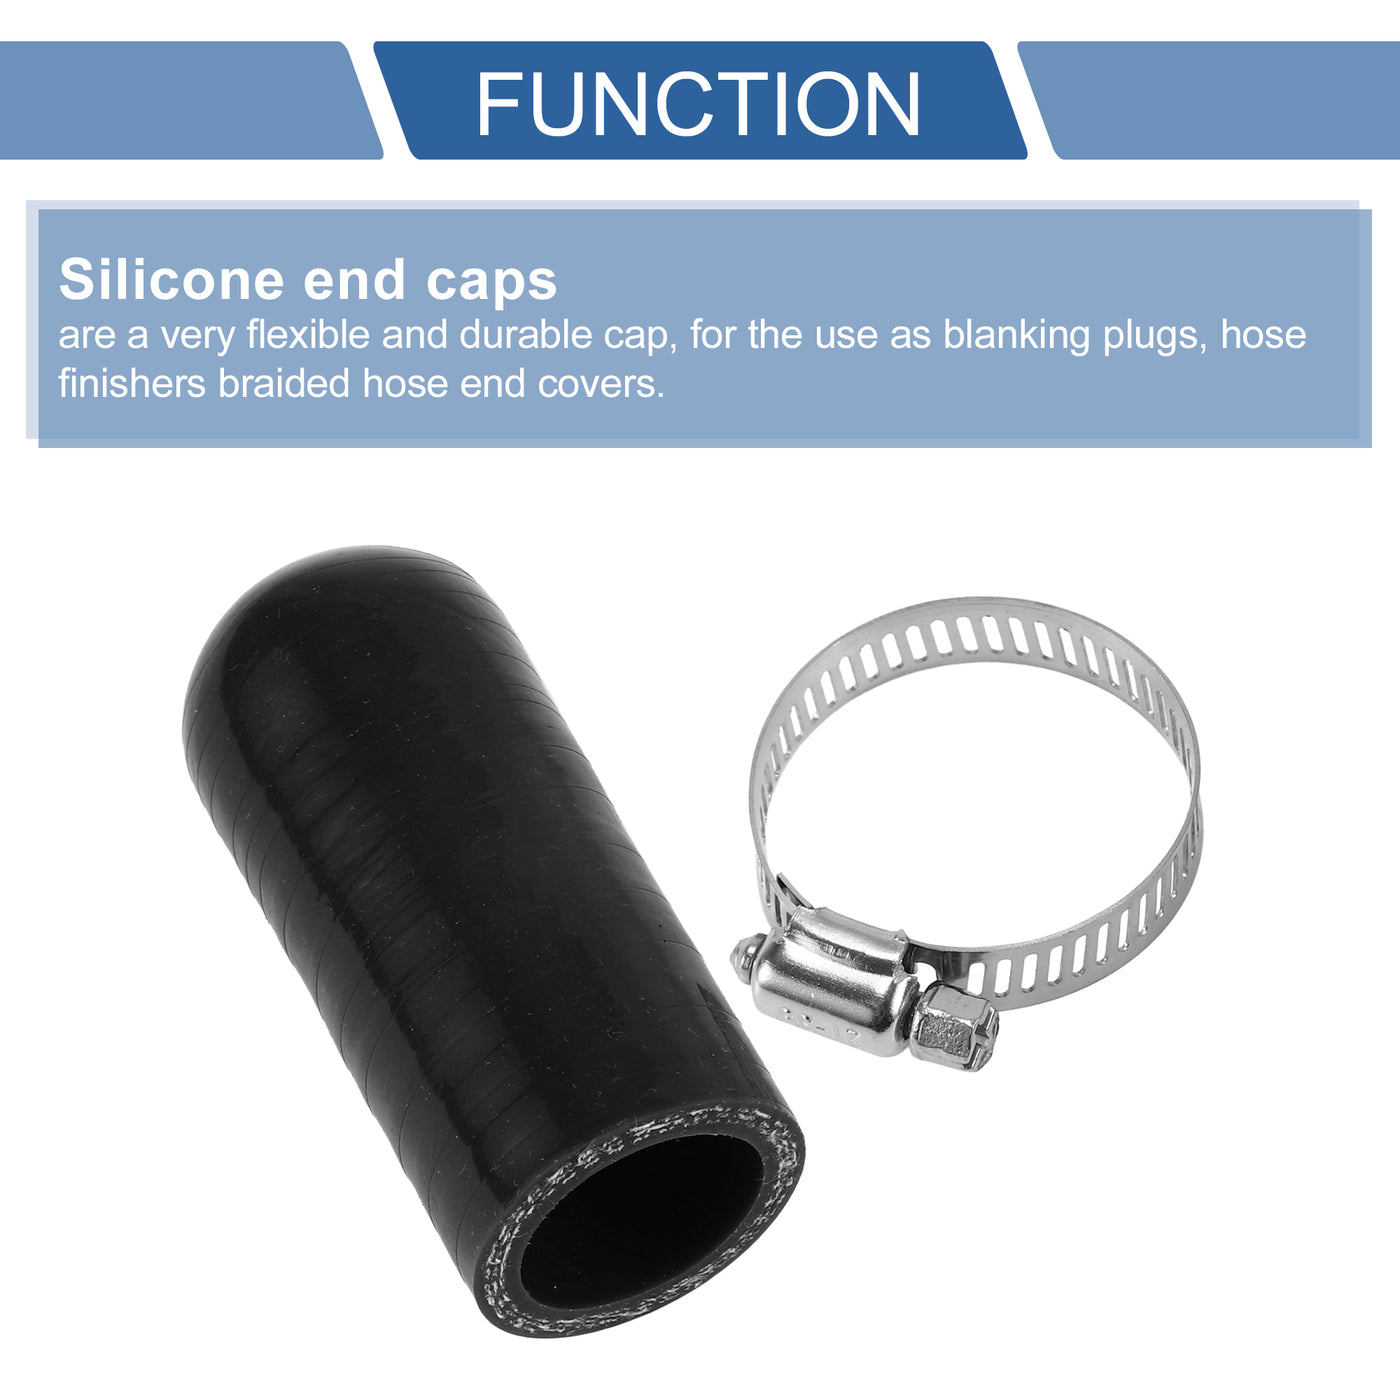 X AUTOHAUX 1 Pcs 60mm Length 25mm/0.98" ID Black Car Silicone Rubber Hose End Cap with Clamp Silicone Reinforced Blanking Cap for Bypass Tube Universal